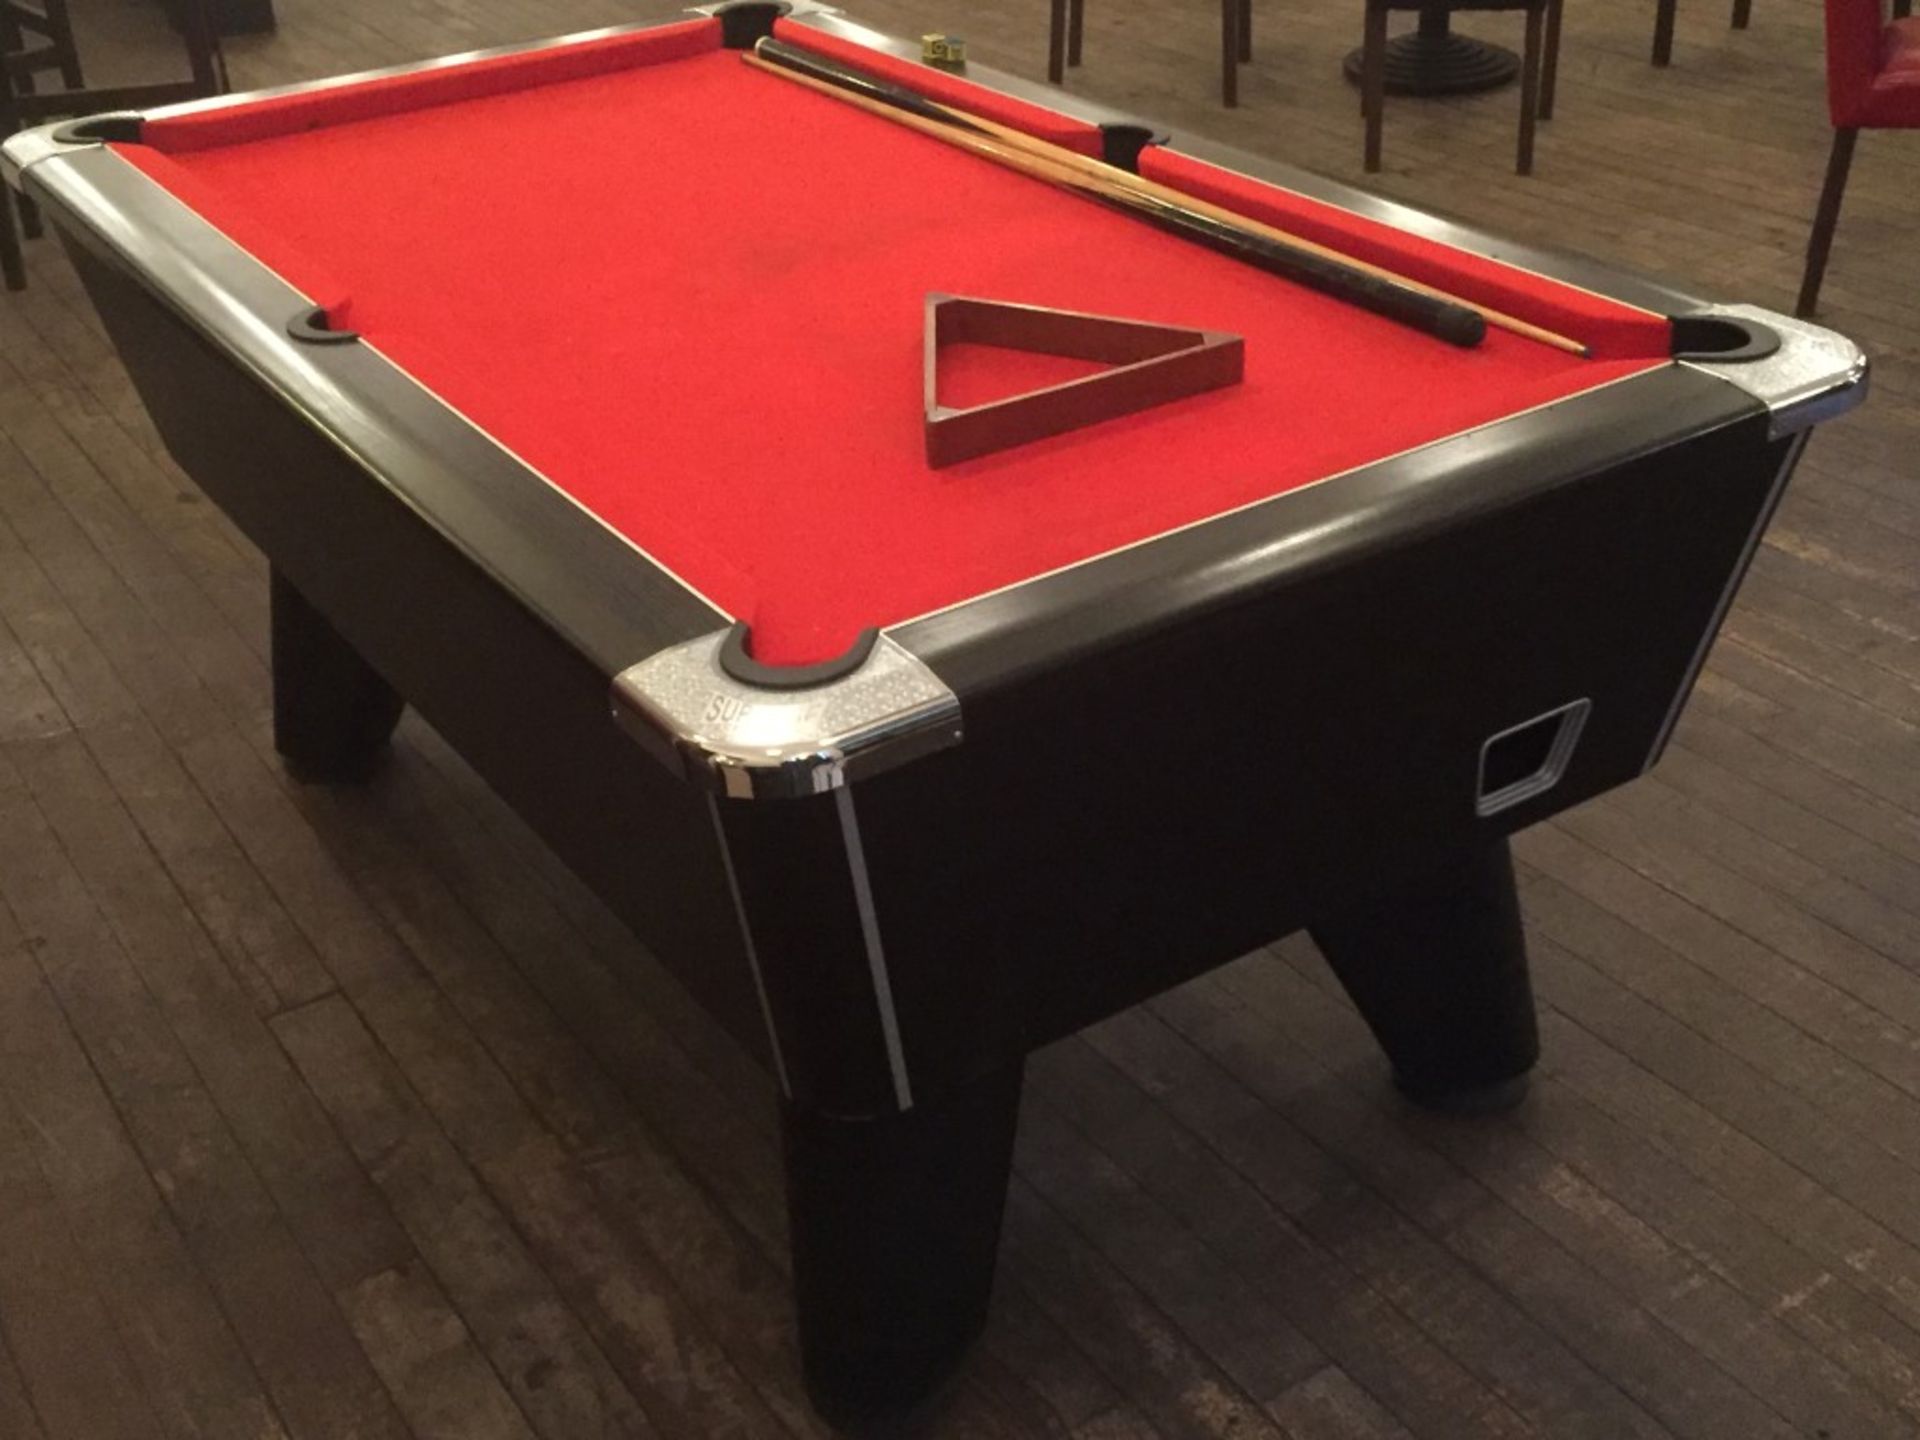 1 x Supreme "Winner" 6ft Commercial Coin-Operated Pool Table - Includes Balls, Triangle And 2 Cues - - Image 9 of 10